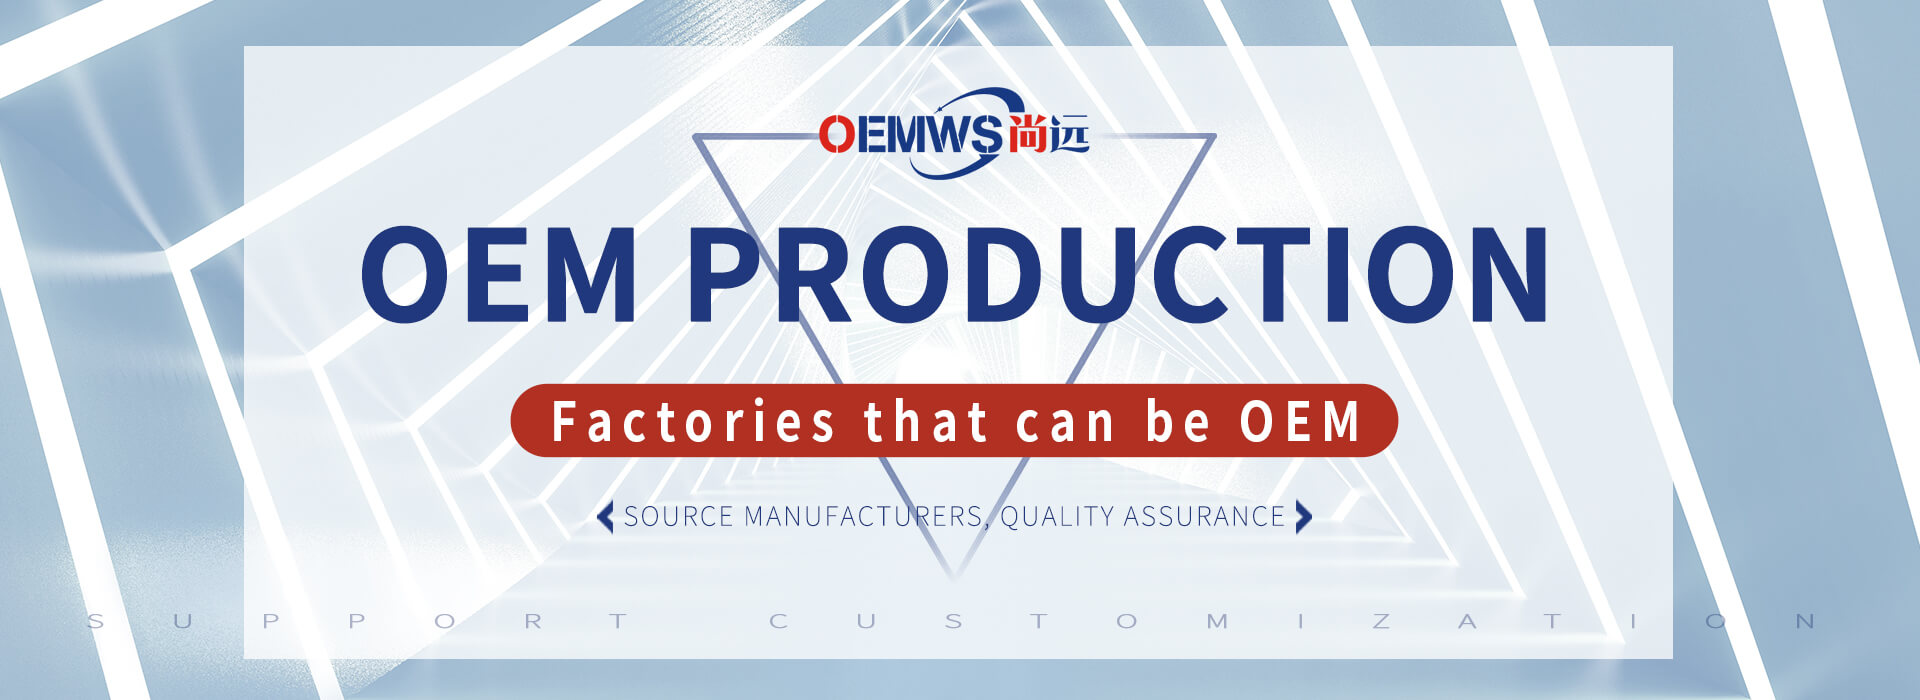 OEMWS-a factory specializing in the production of air intake hose